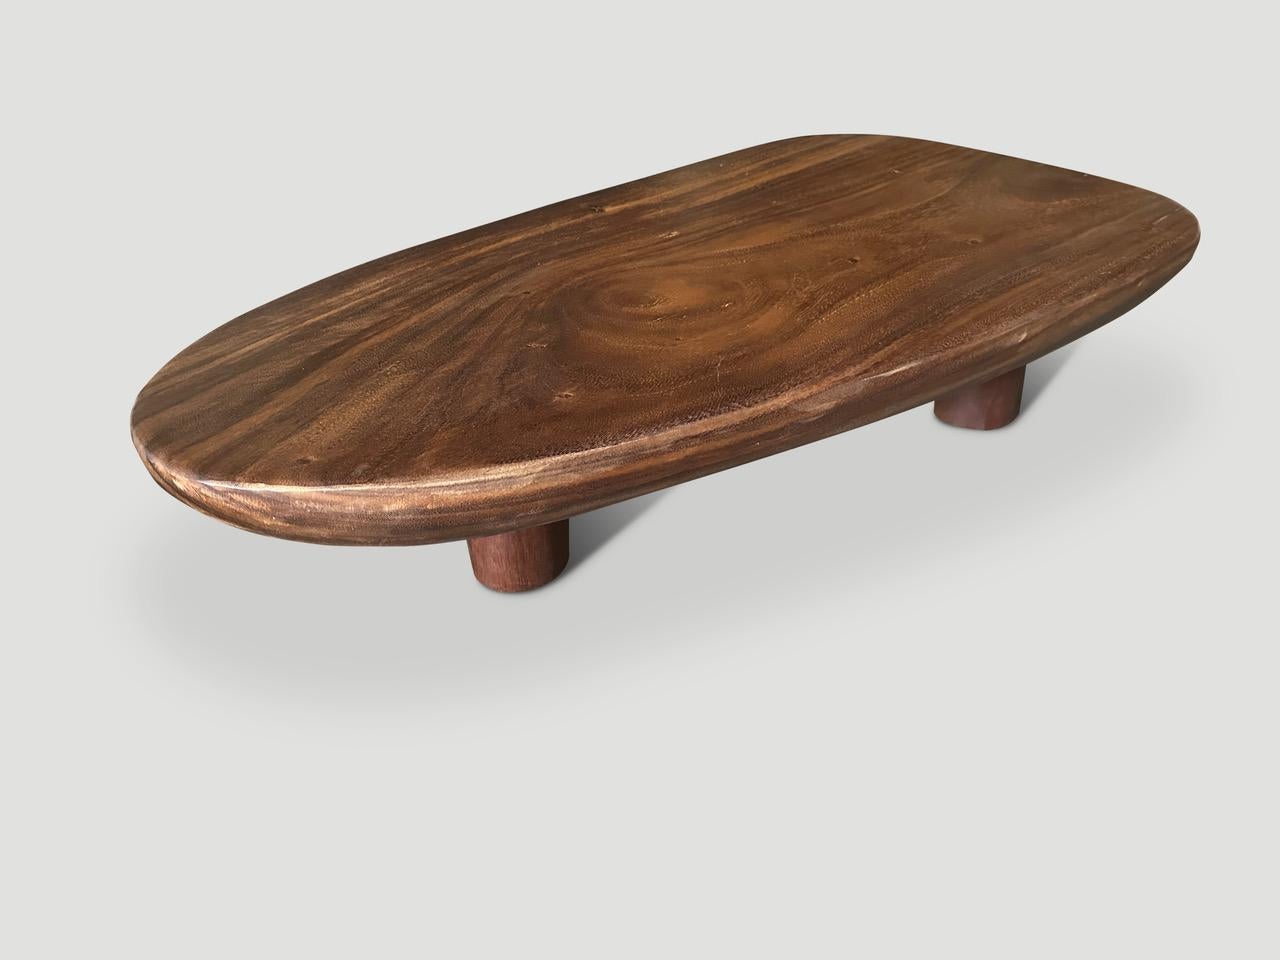 A beautiful single thick suar wood slab is hand carved to produce this minimalist coffee table. We added four cylinder legs allowing the top to float. Finished with a natural oil revealing the exquisite wood grain. It’s all in the details. Full